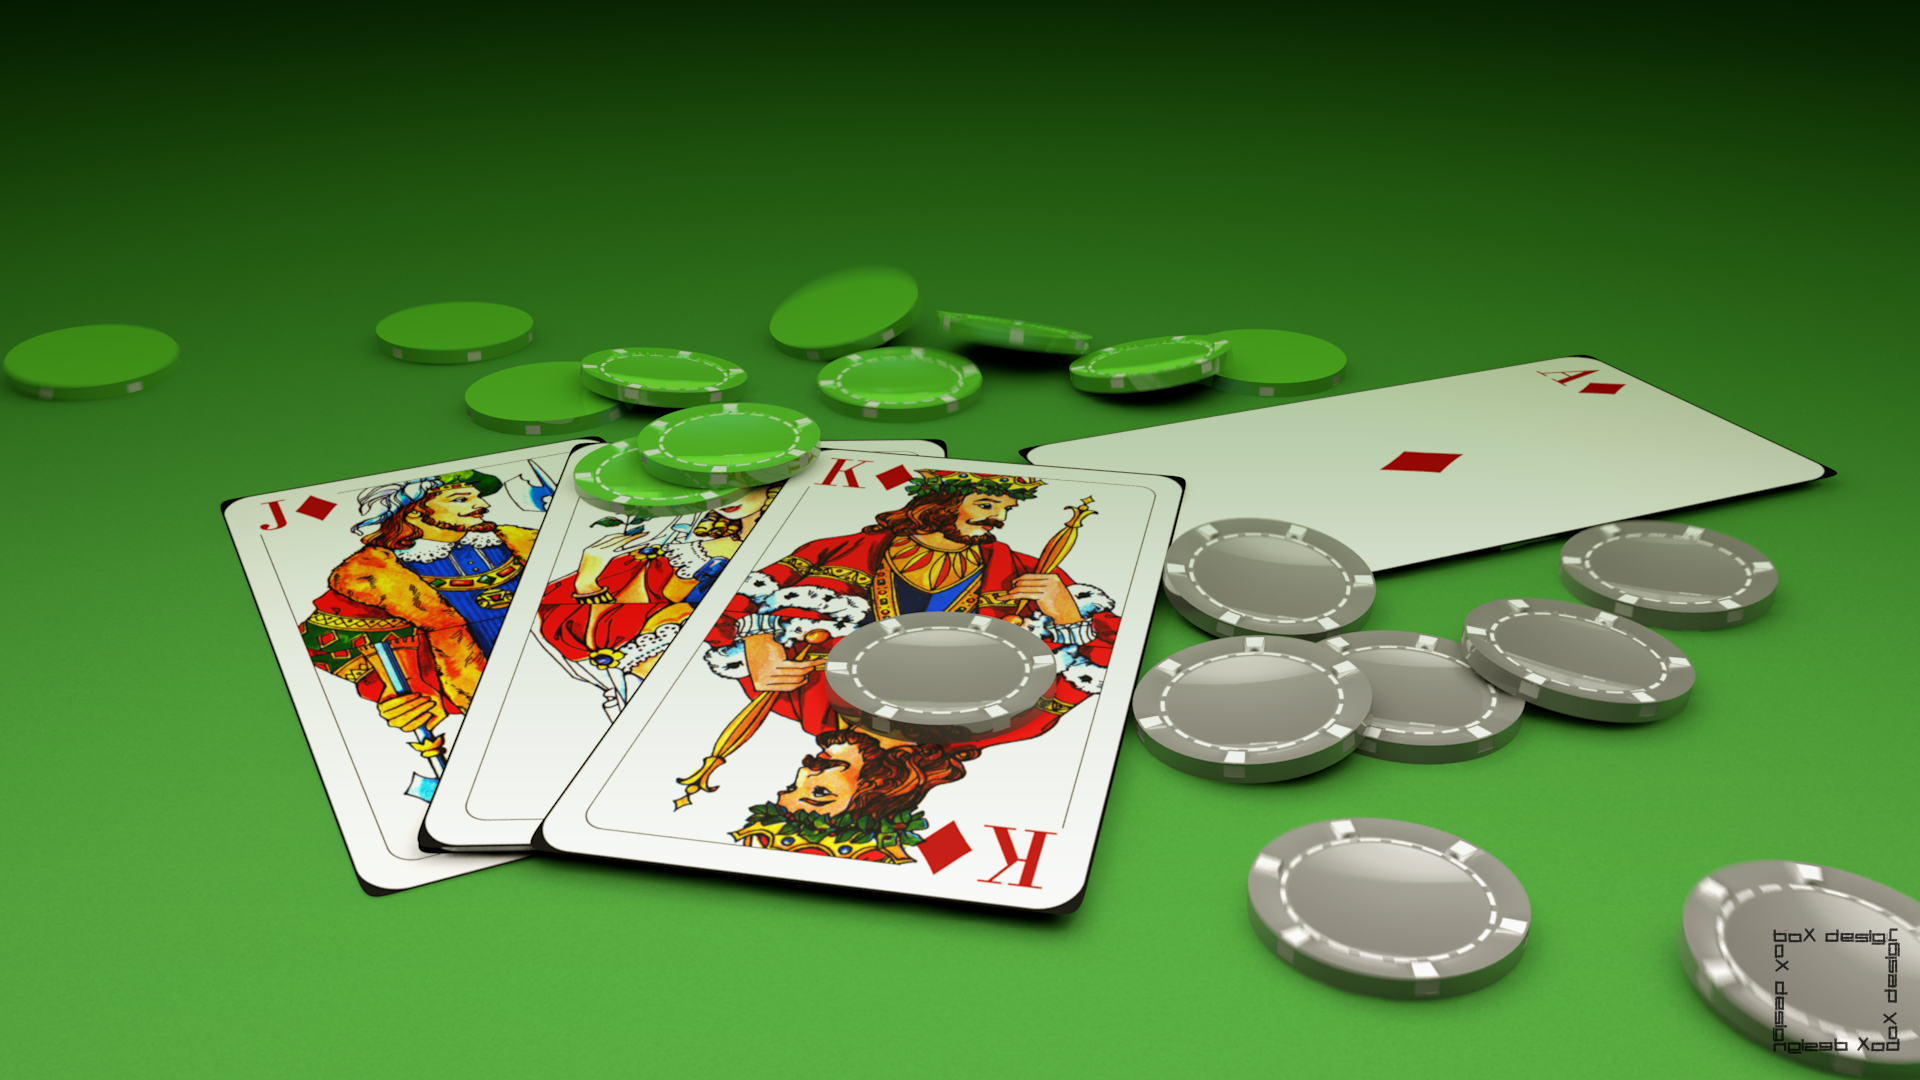 Online casinos and their services